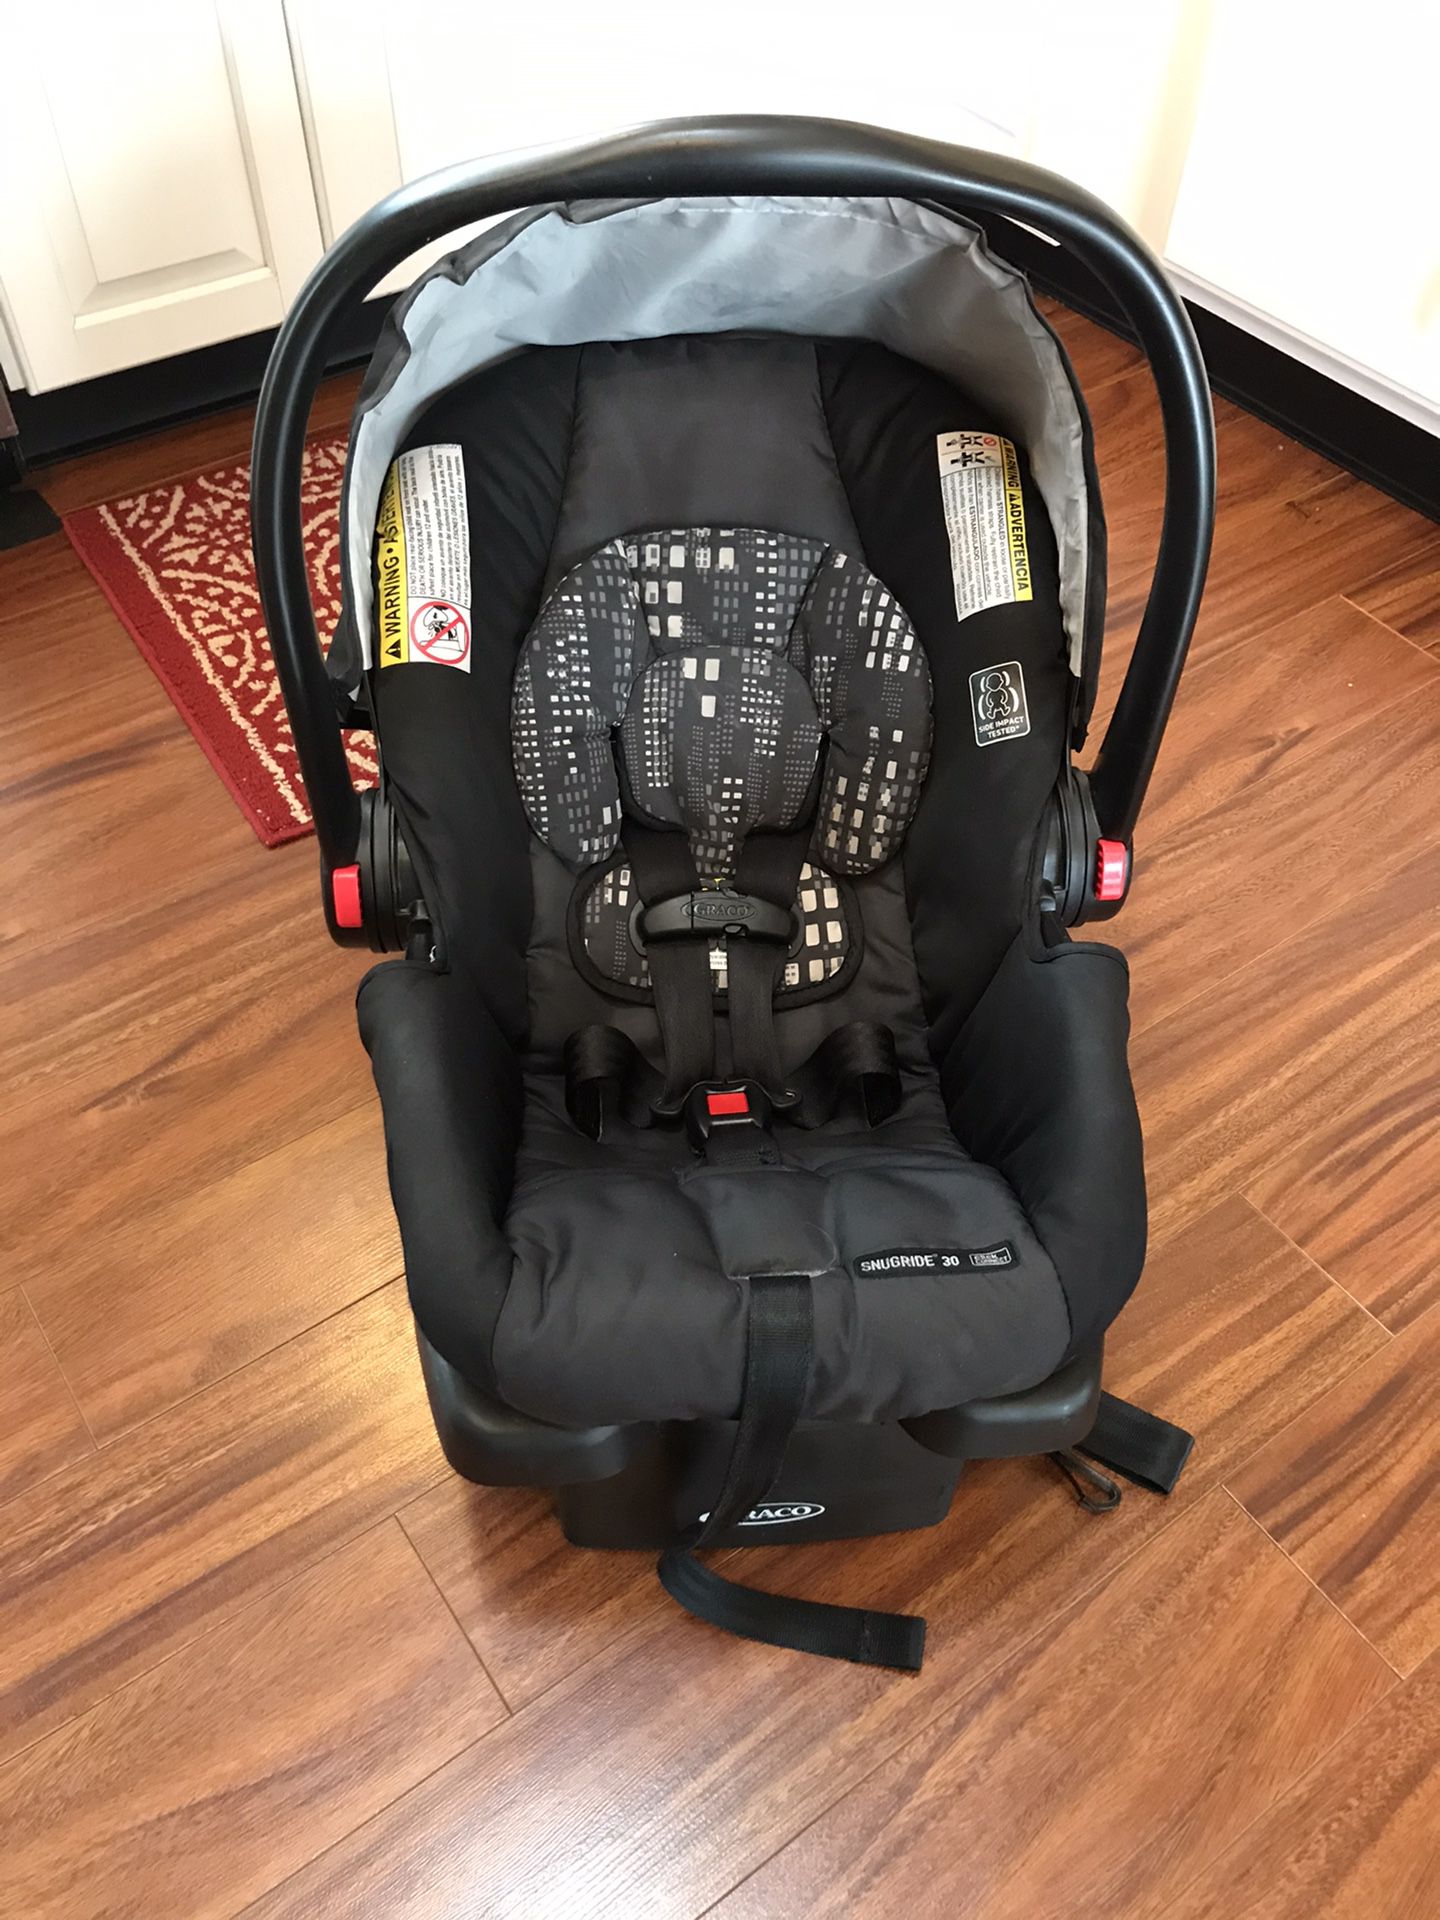 Graco SungRide Click Connect 30 *car seat cover included*